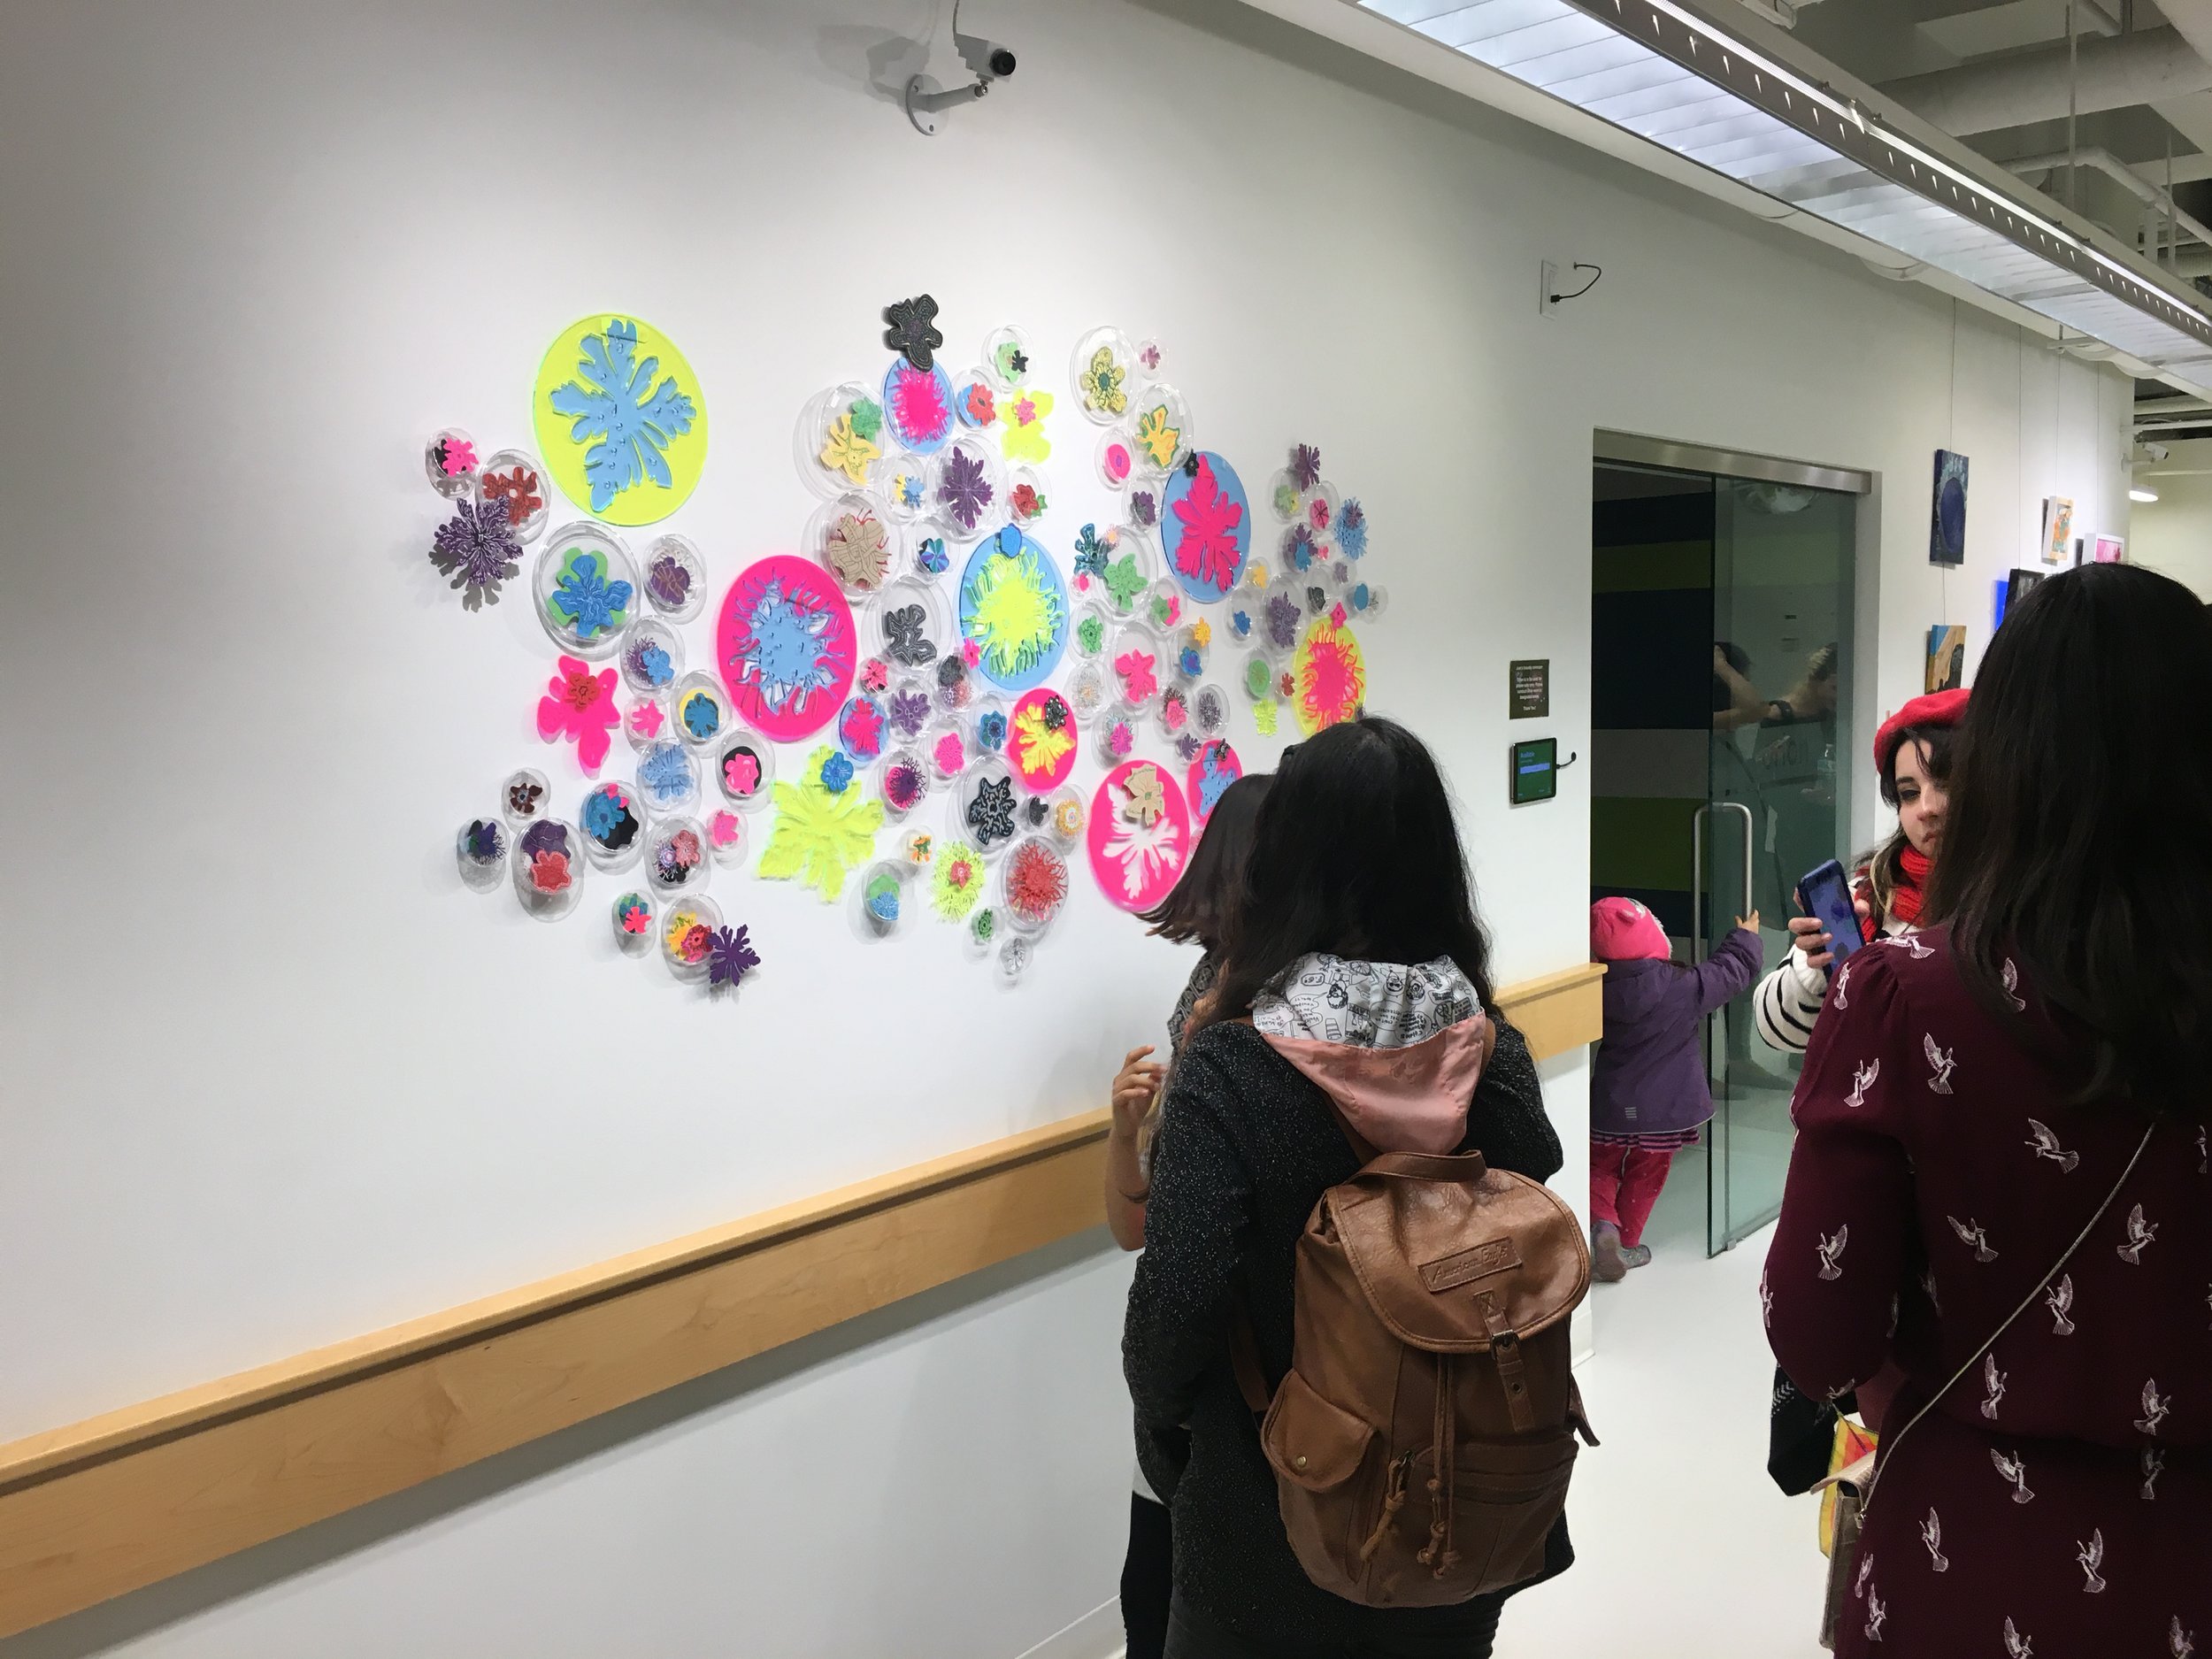  Assisted Saùl Nava laser cut microorganisms for a bio exhibit at the MIT, 2018. 